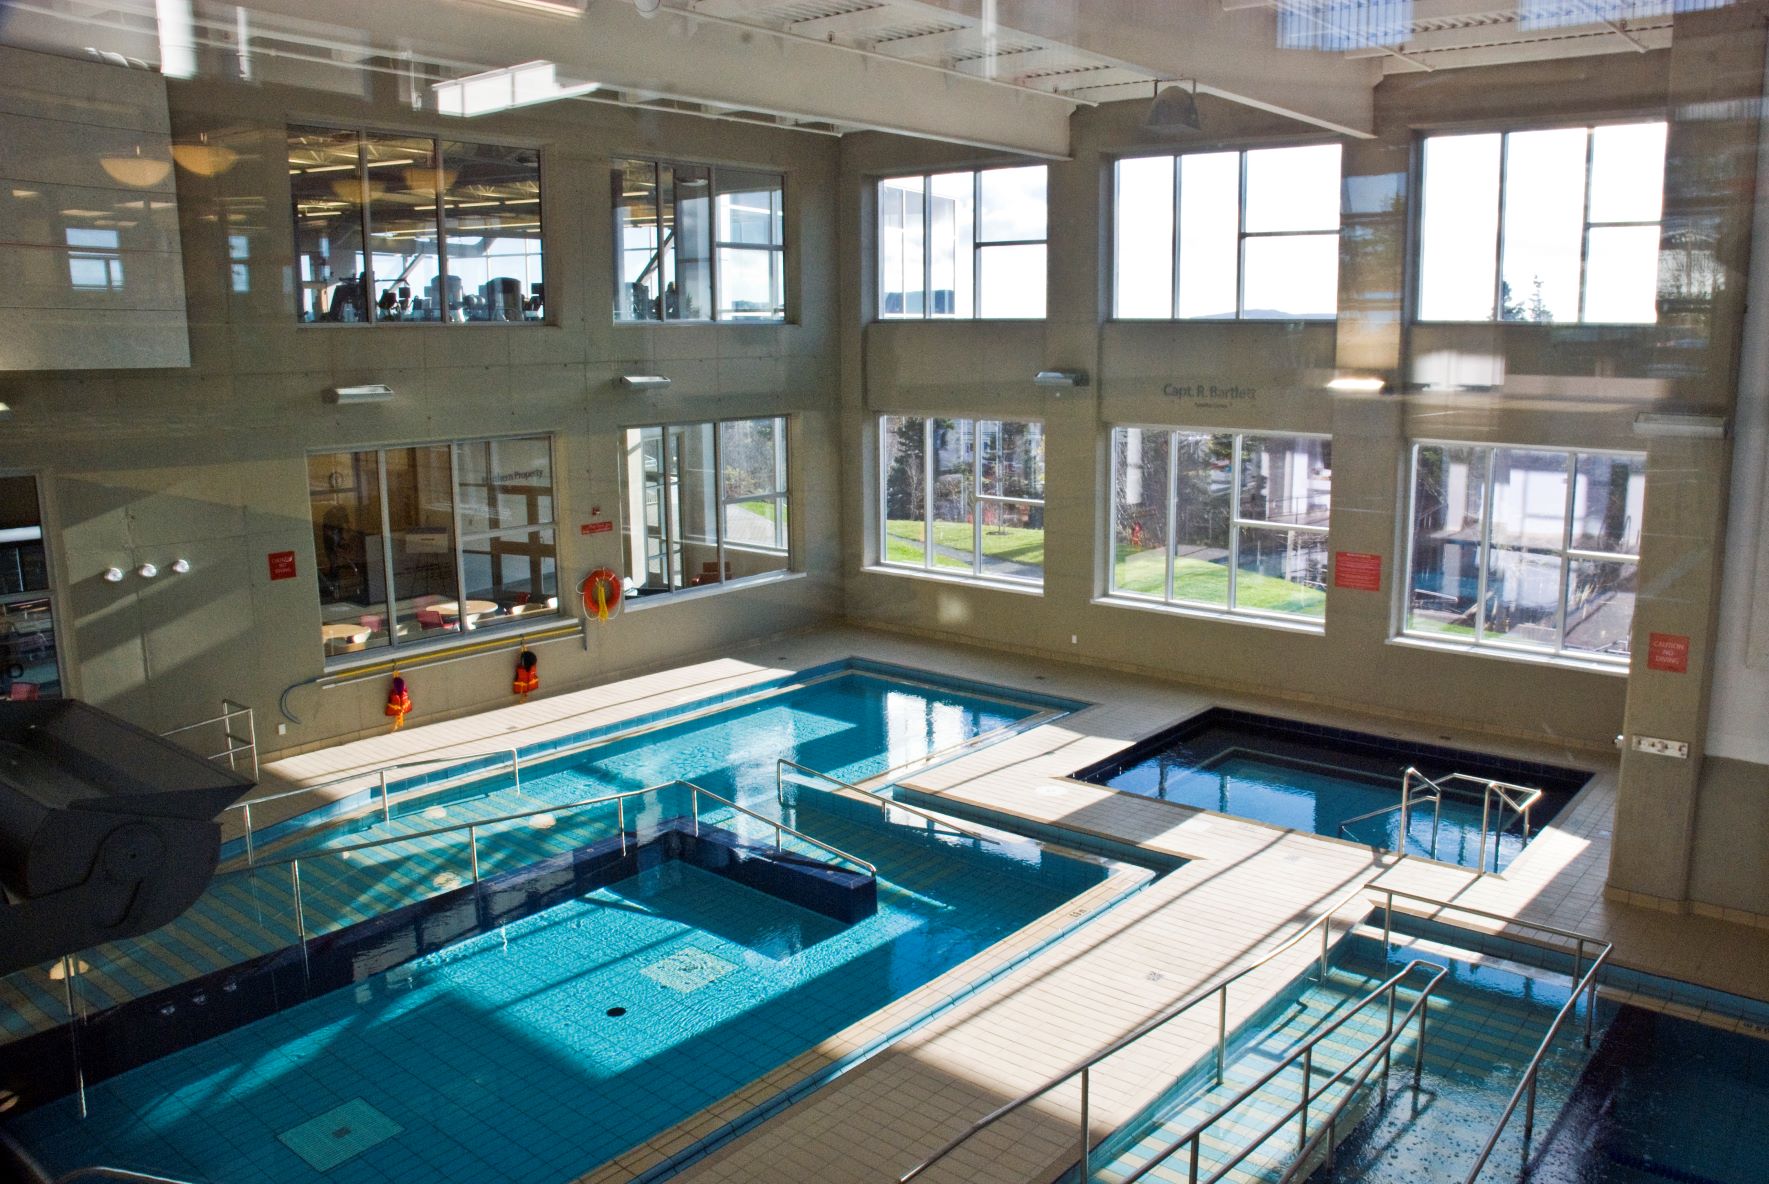 Ches Penney Family YMCA - Pool